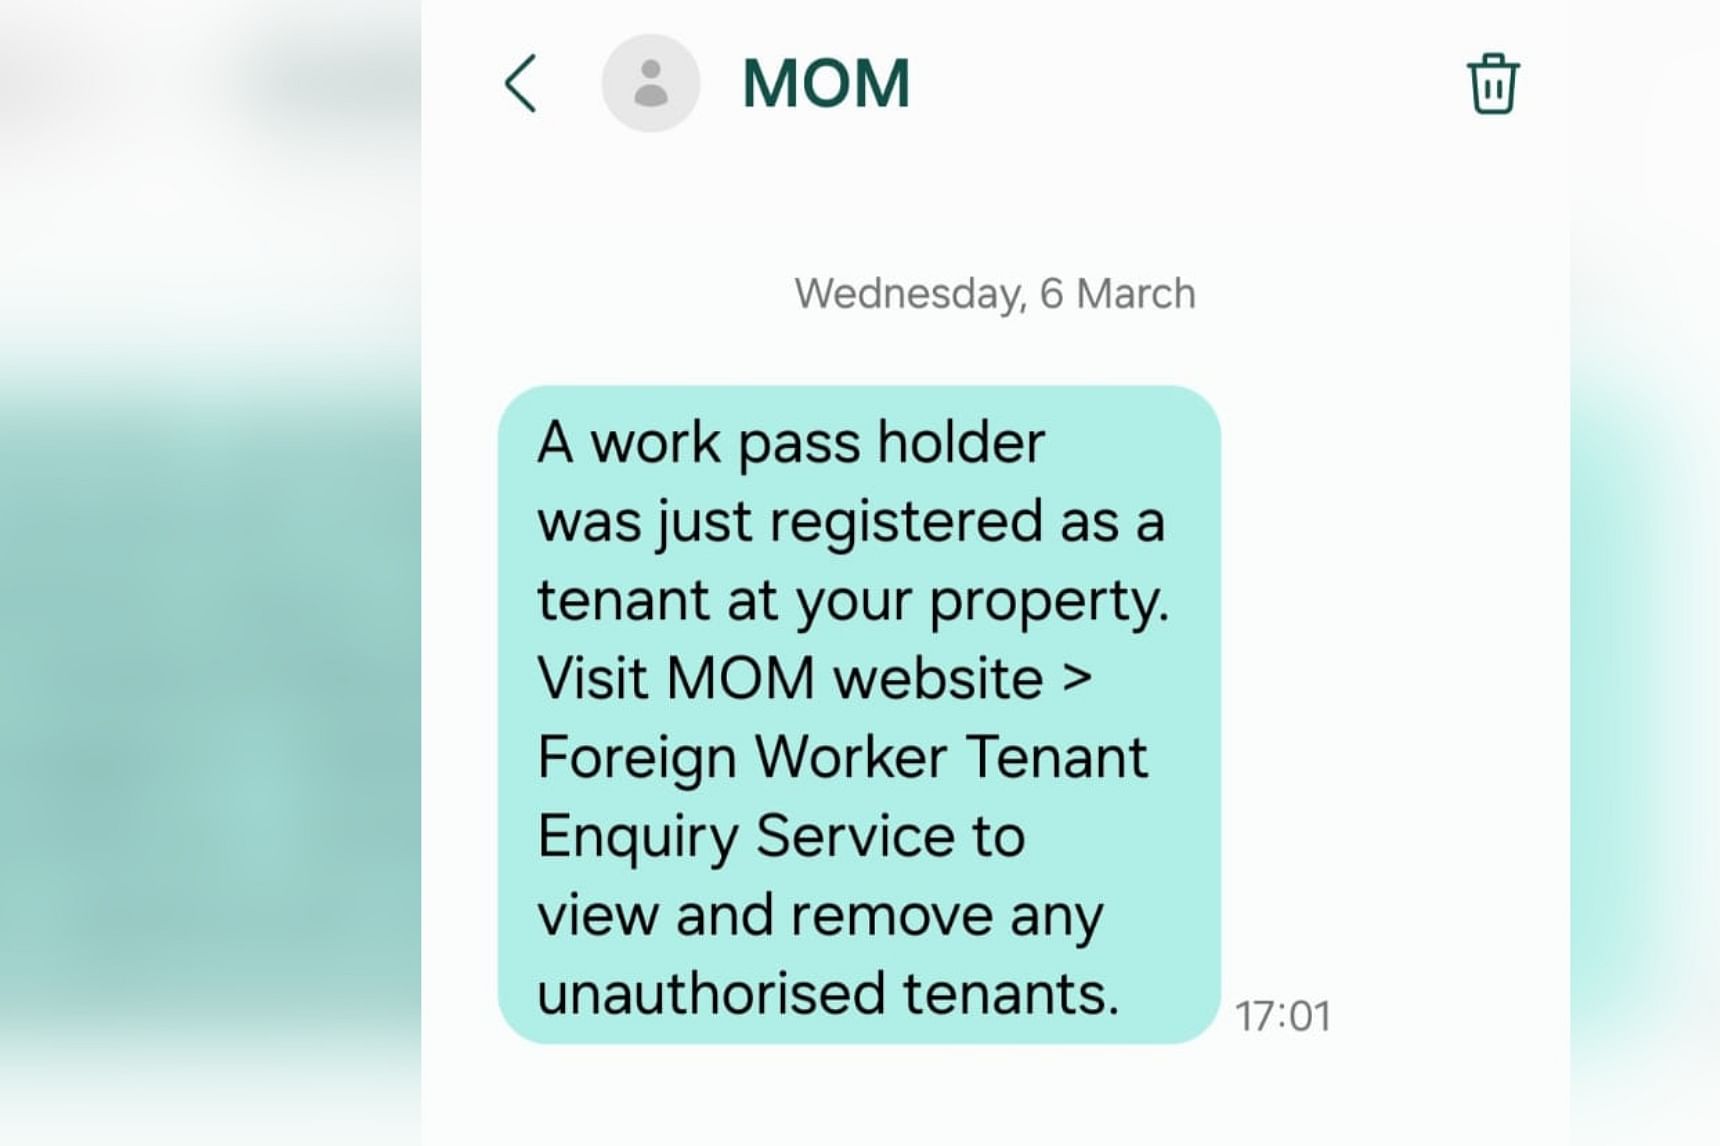 Woman finds 2 migrant workers registered to her condo without her knowledge, files police report